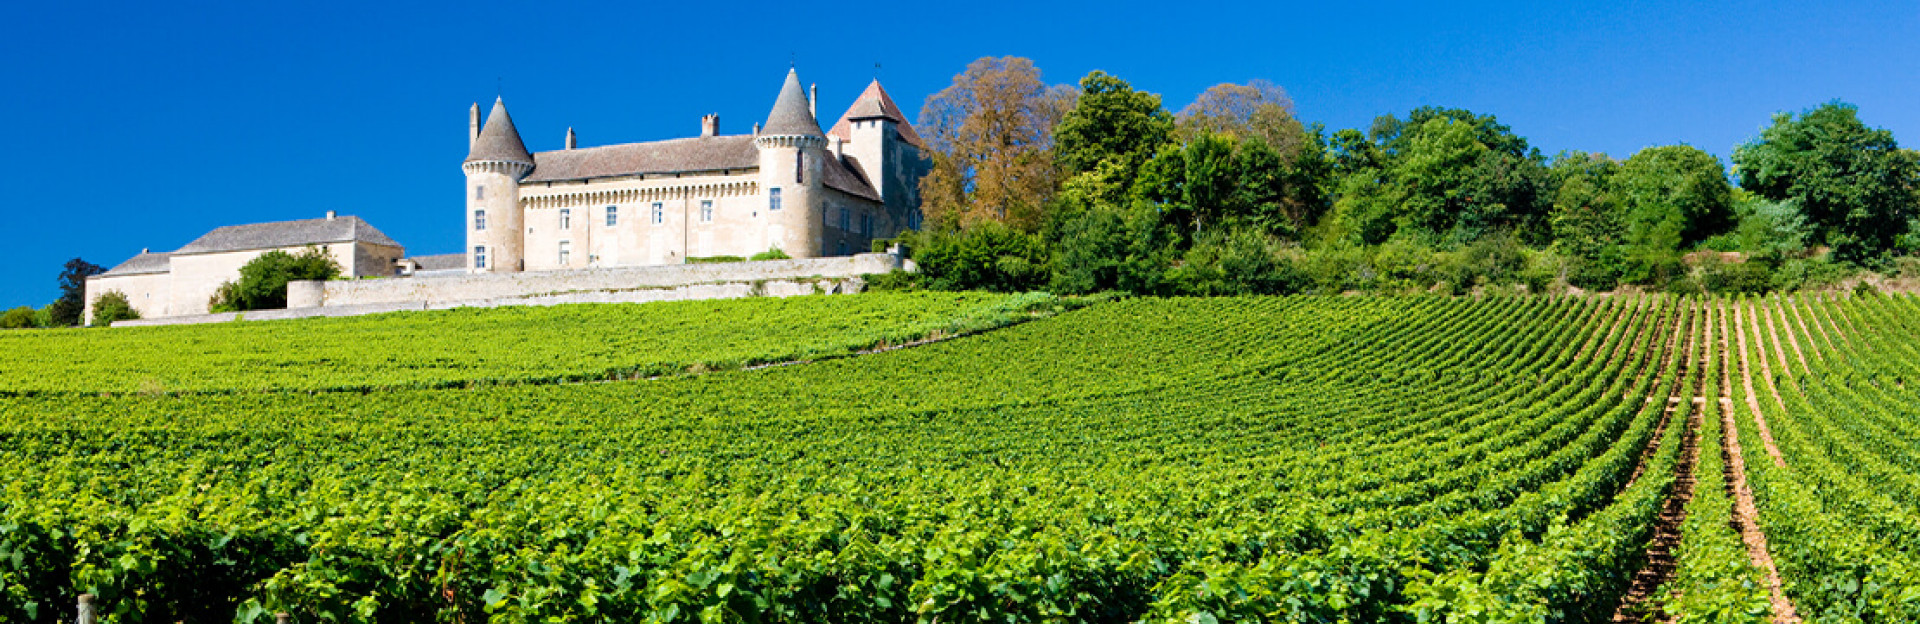 In the heart of the picturesque Loire valley